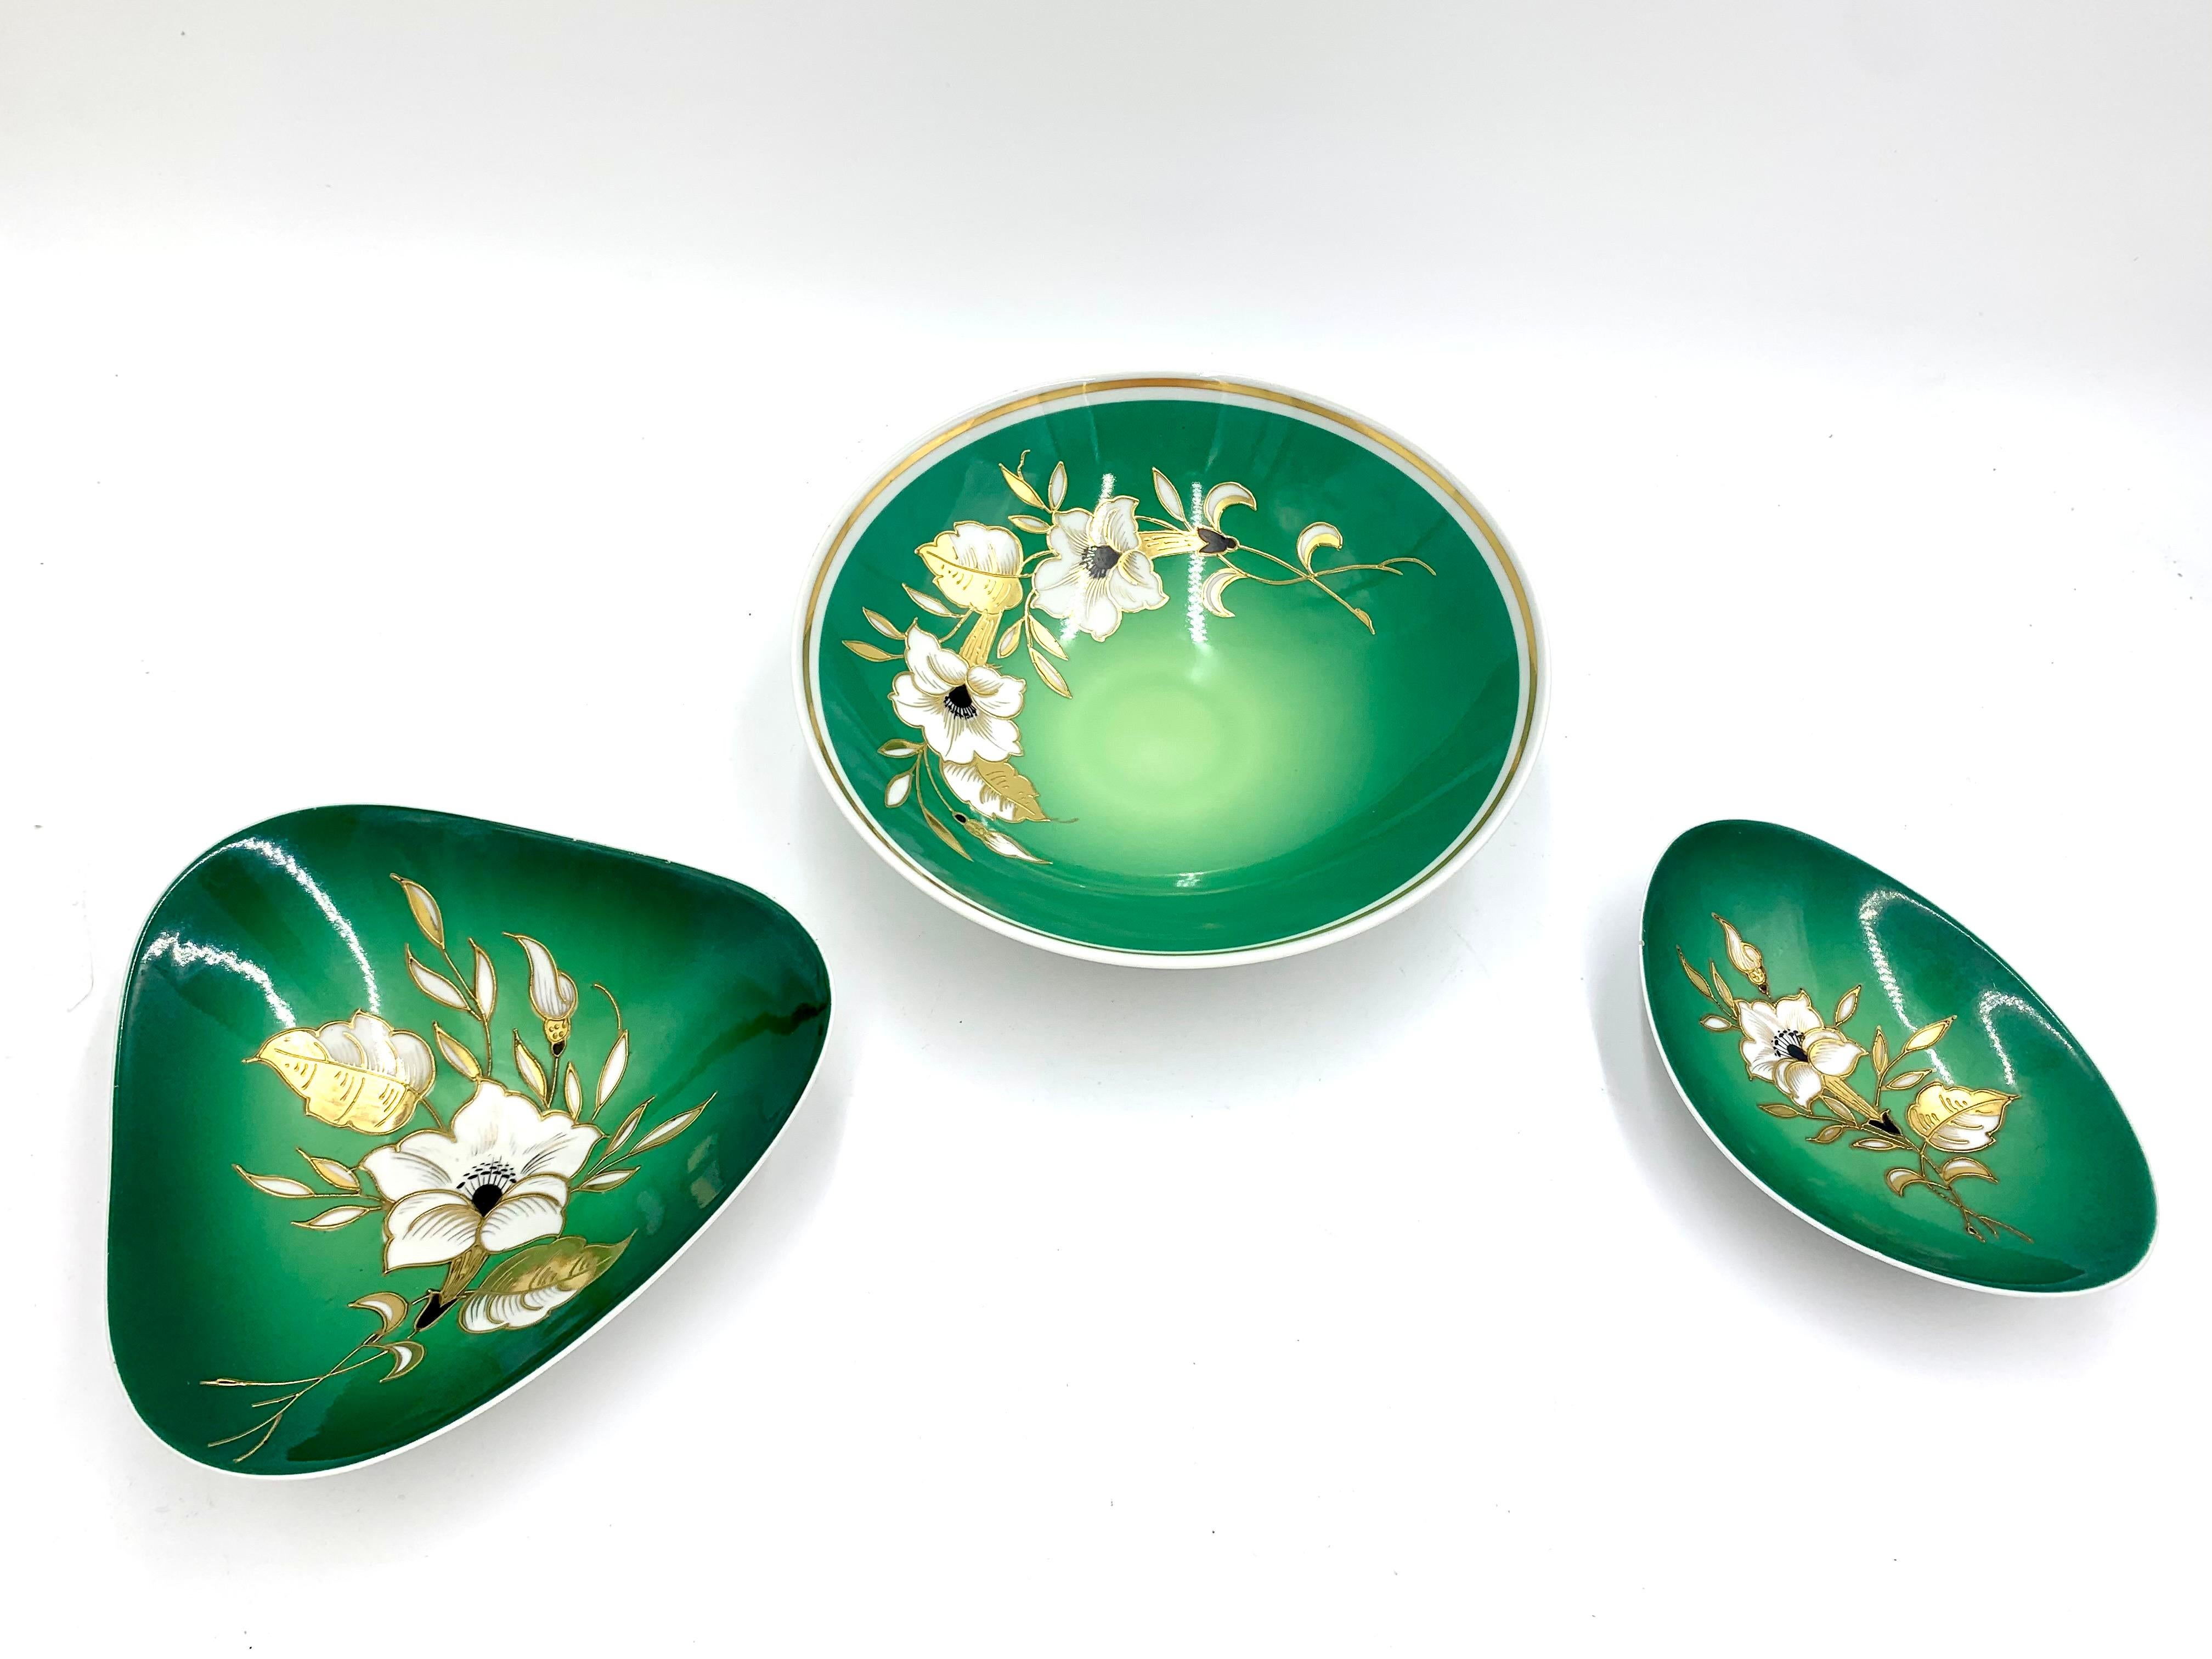 Three porcelain dishes made in Thuringia, signed Wallendorf.

The Goldrelief series in green.

Very good condition.

Dimensions from the left:

triangular platter: width 16 cm

round platter: diameter 21 cm

oval platter: 14 cm long, 11